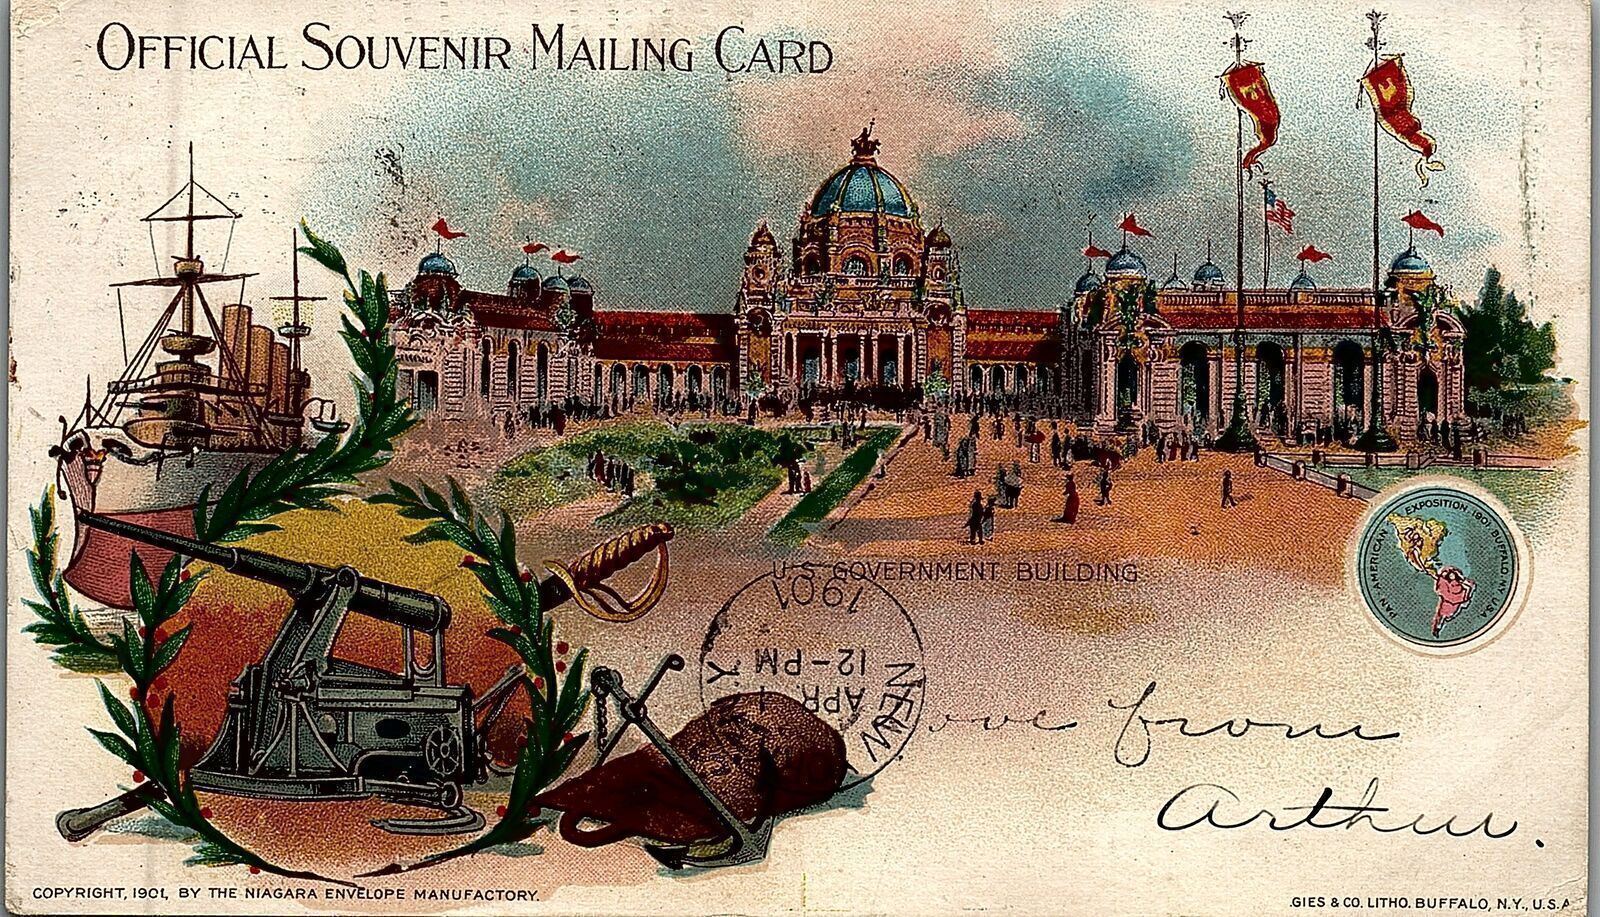 1901 PAN AMERICAN EXPOSITION BUFFALO GOVERNMENT BUILDING MAILING CARD 25-244